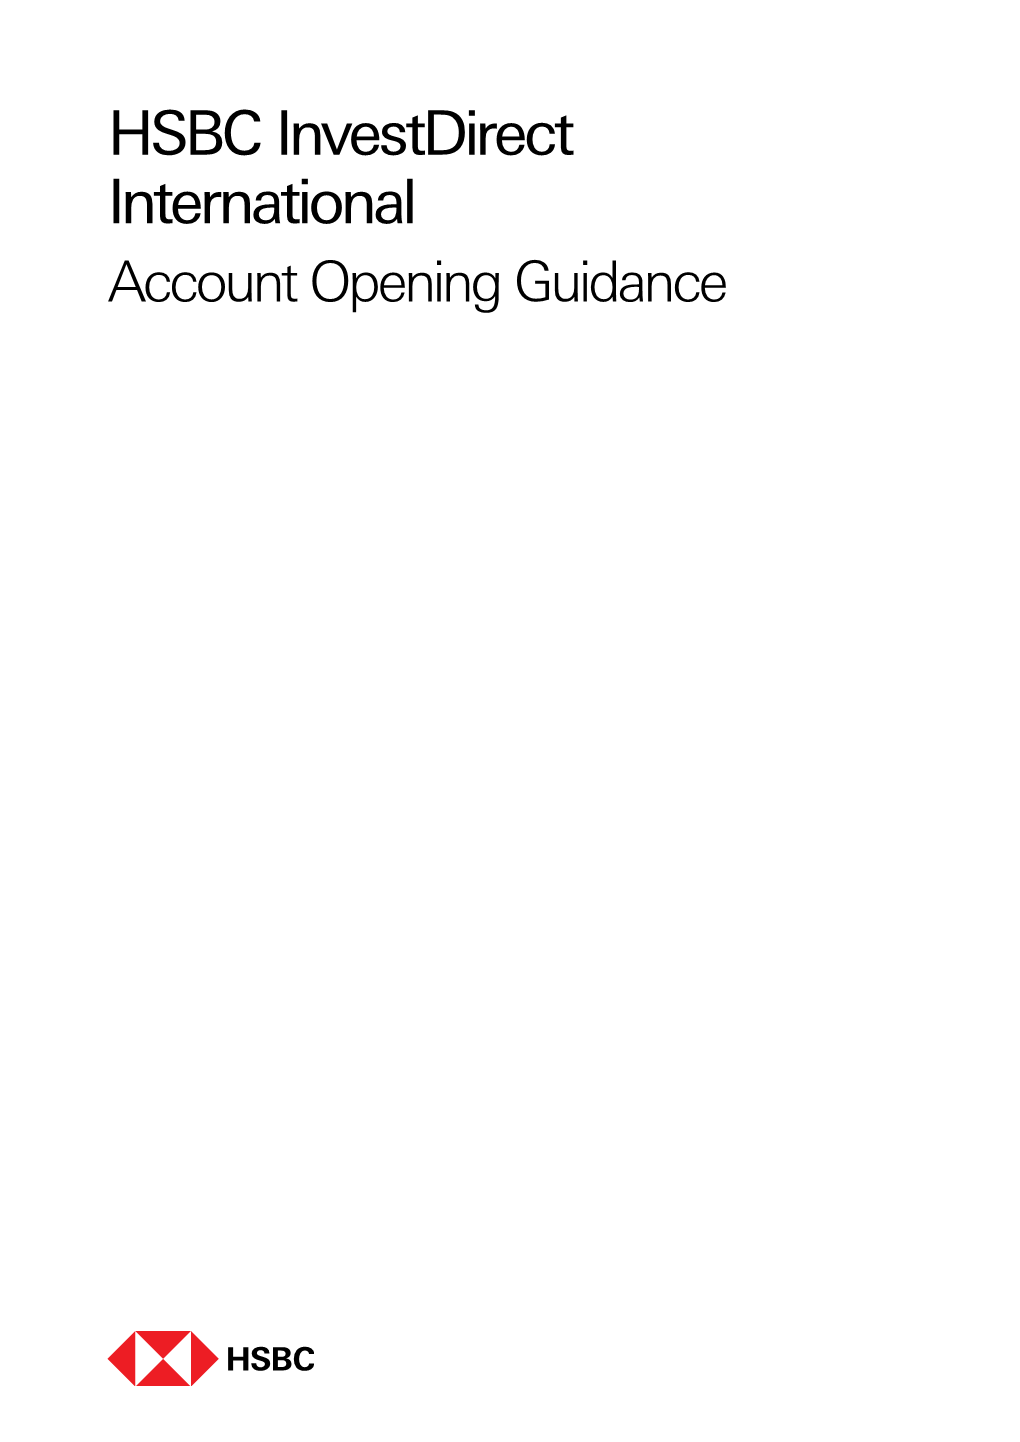 HSBC Investdirect International Account Opening Guidance Frequently Asked Questions